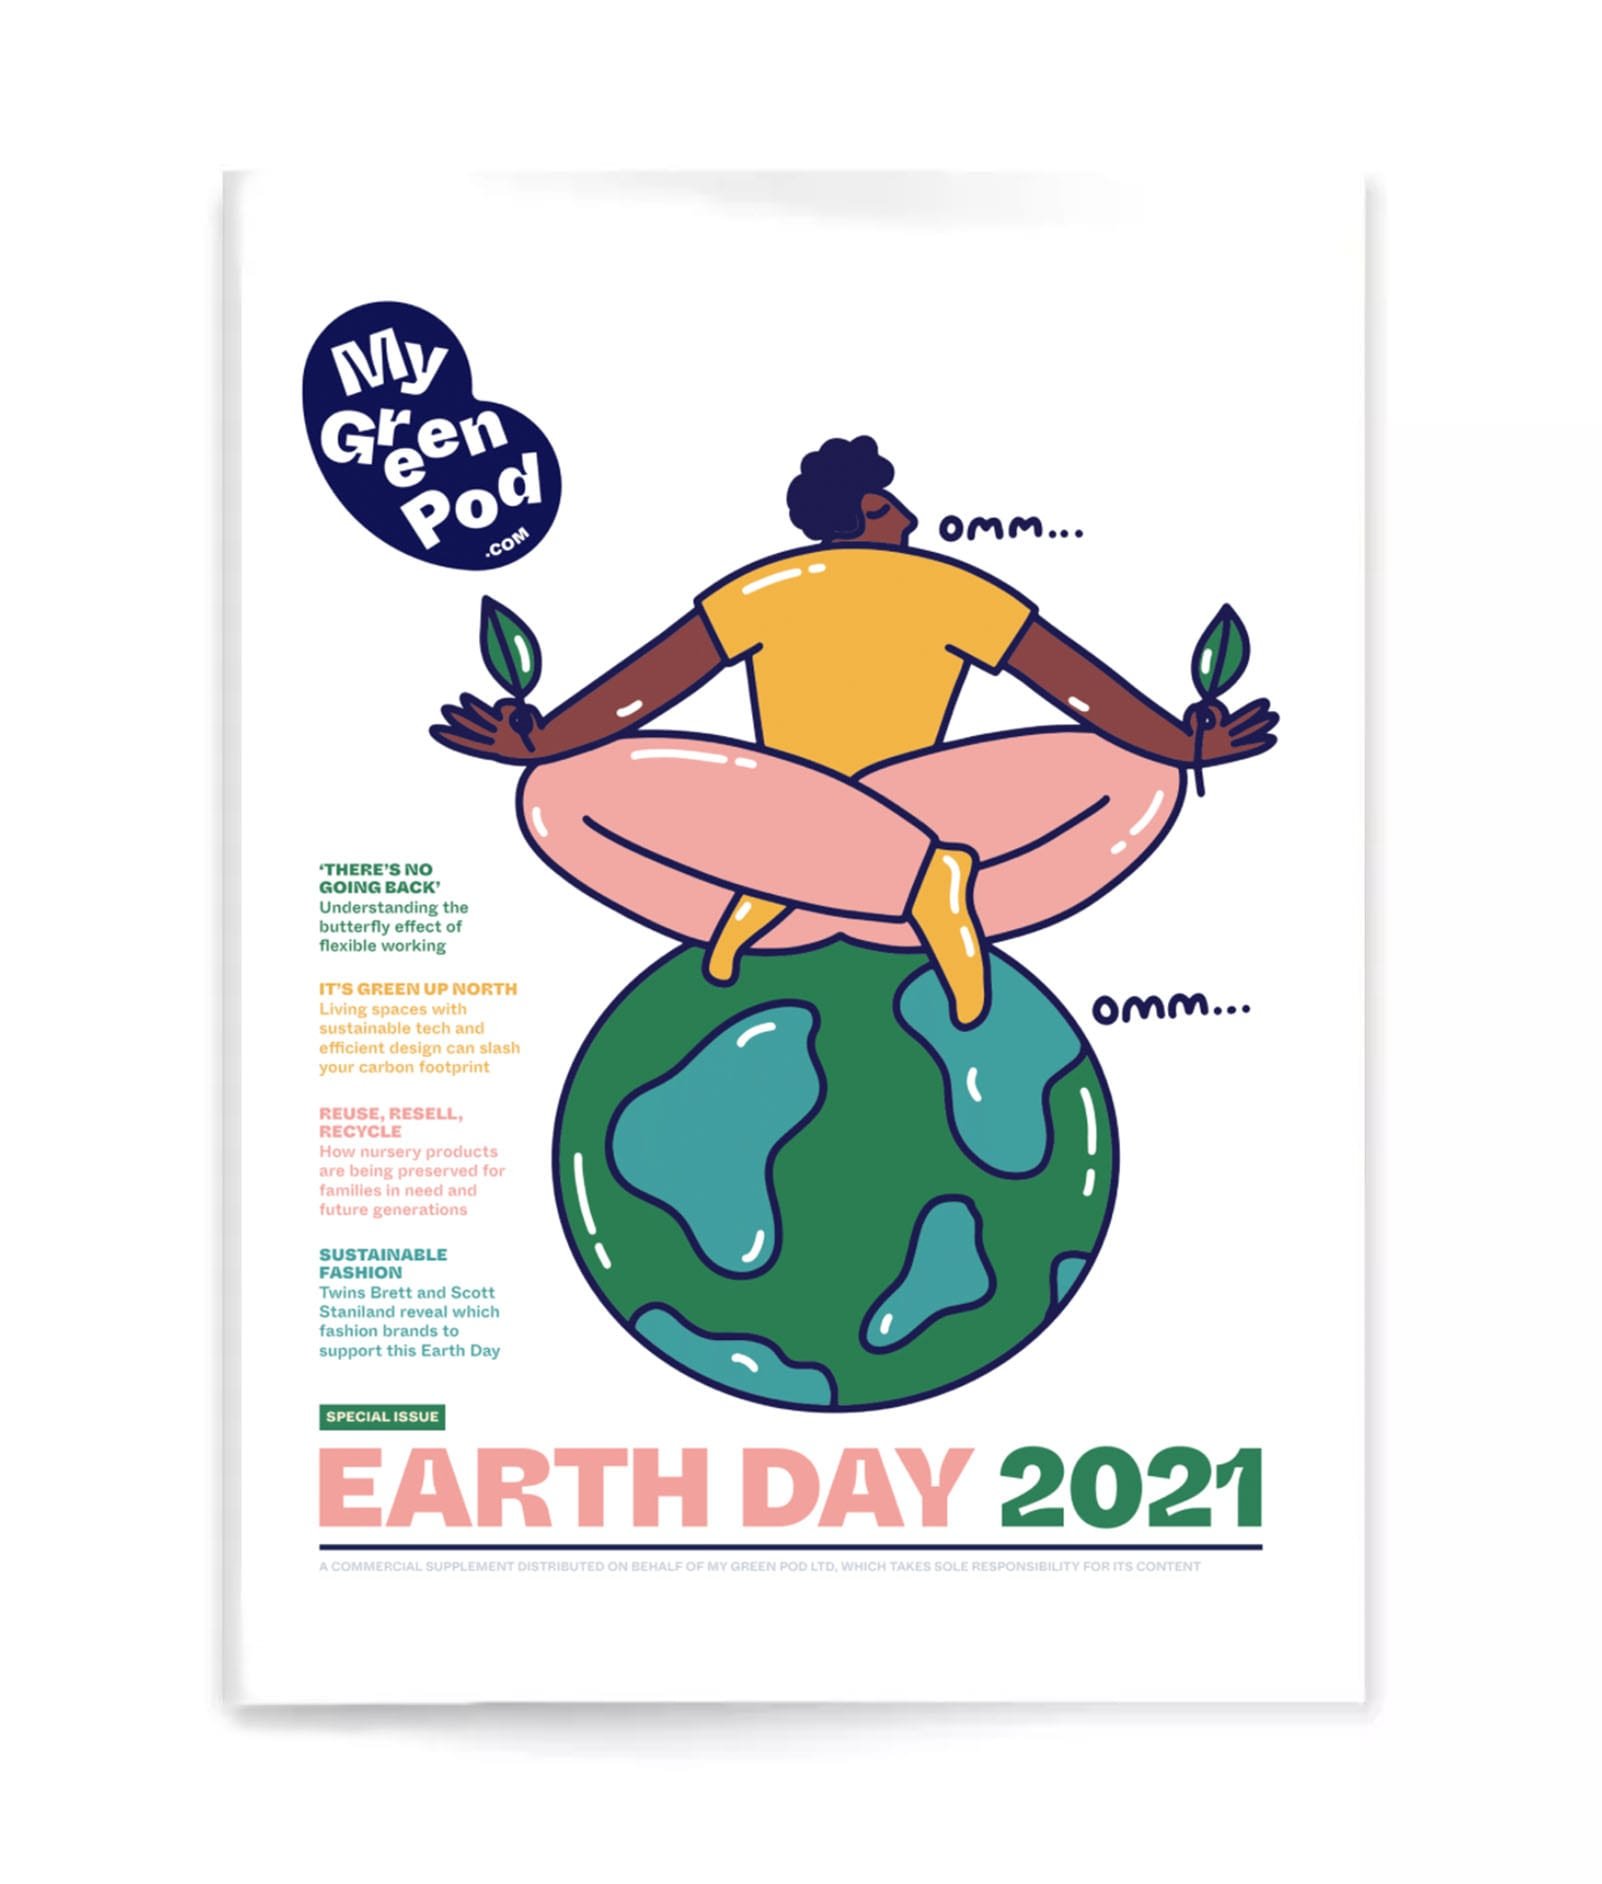 Earth Day 2021 Magazine front cover